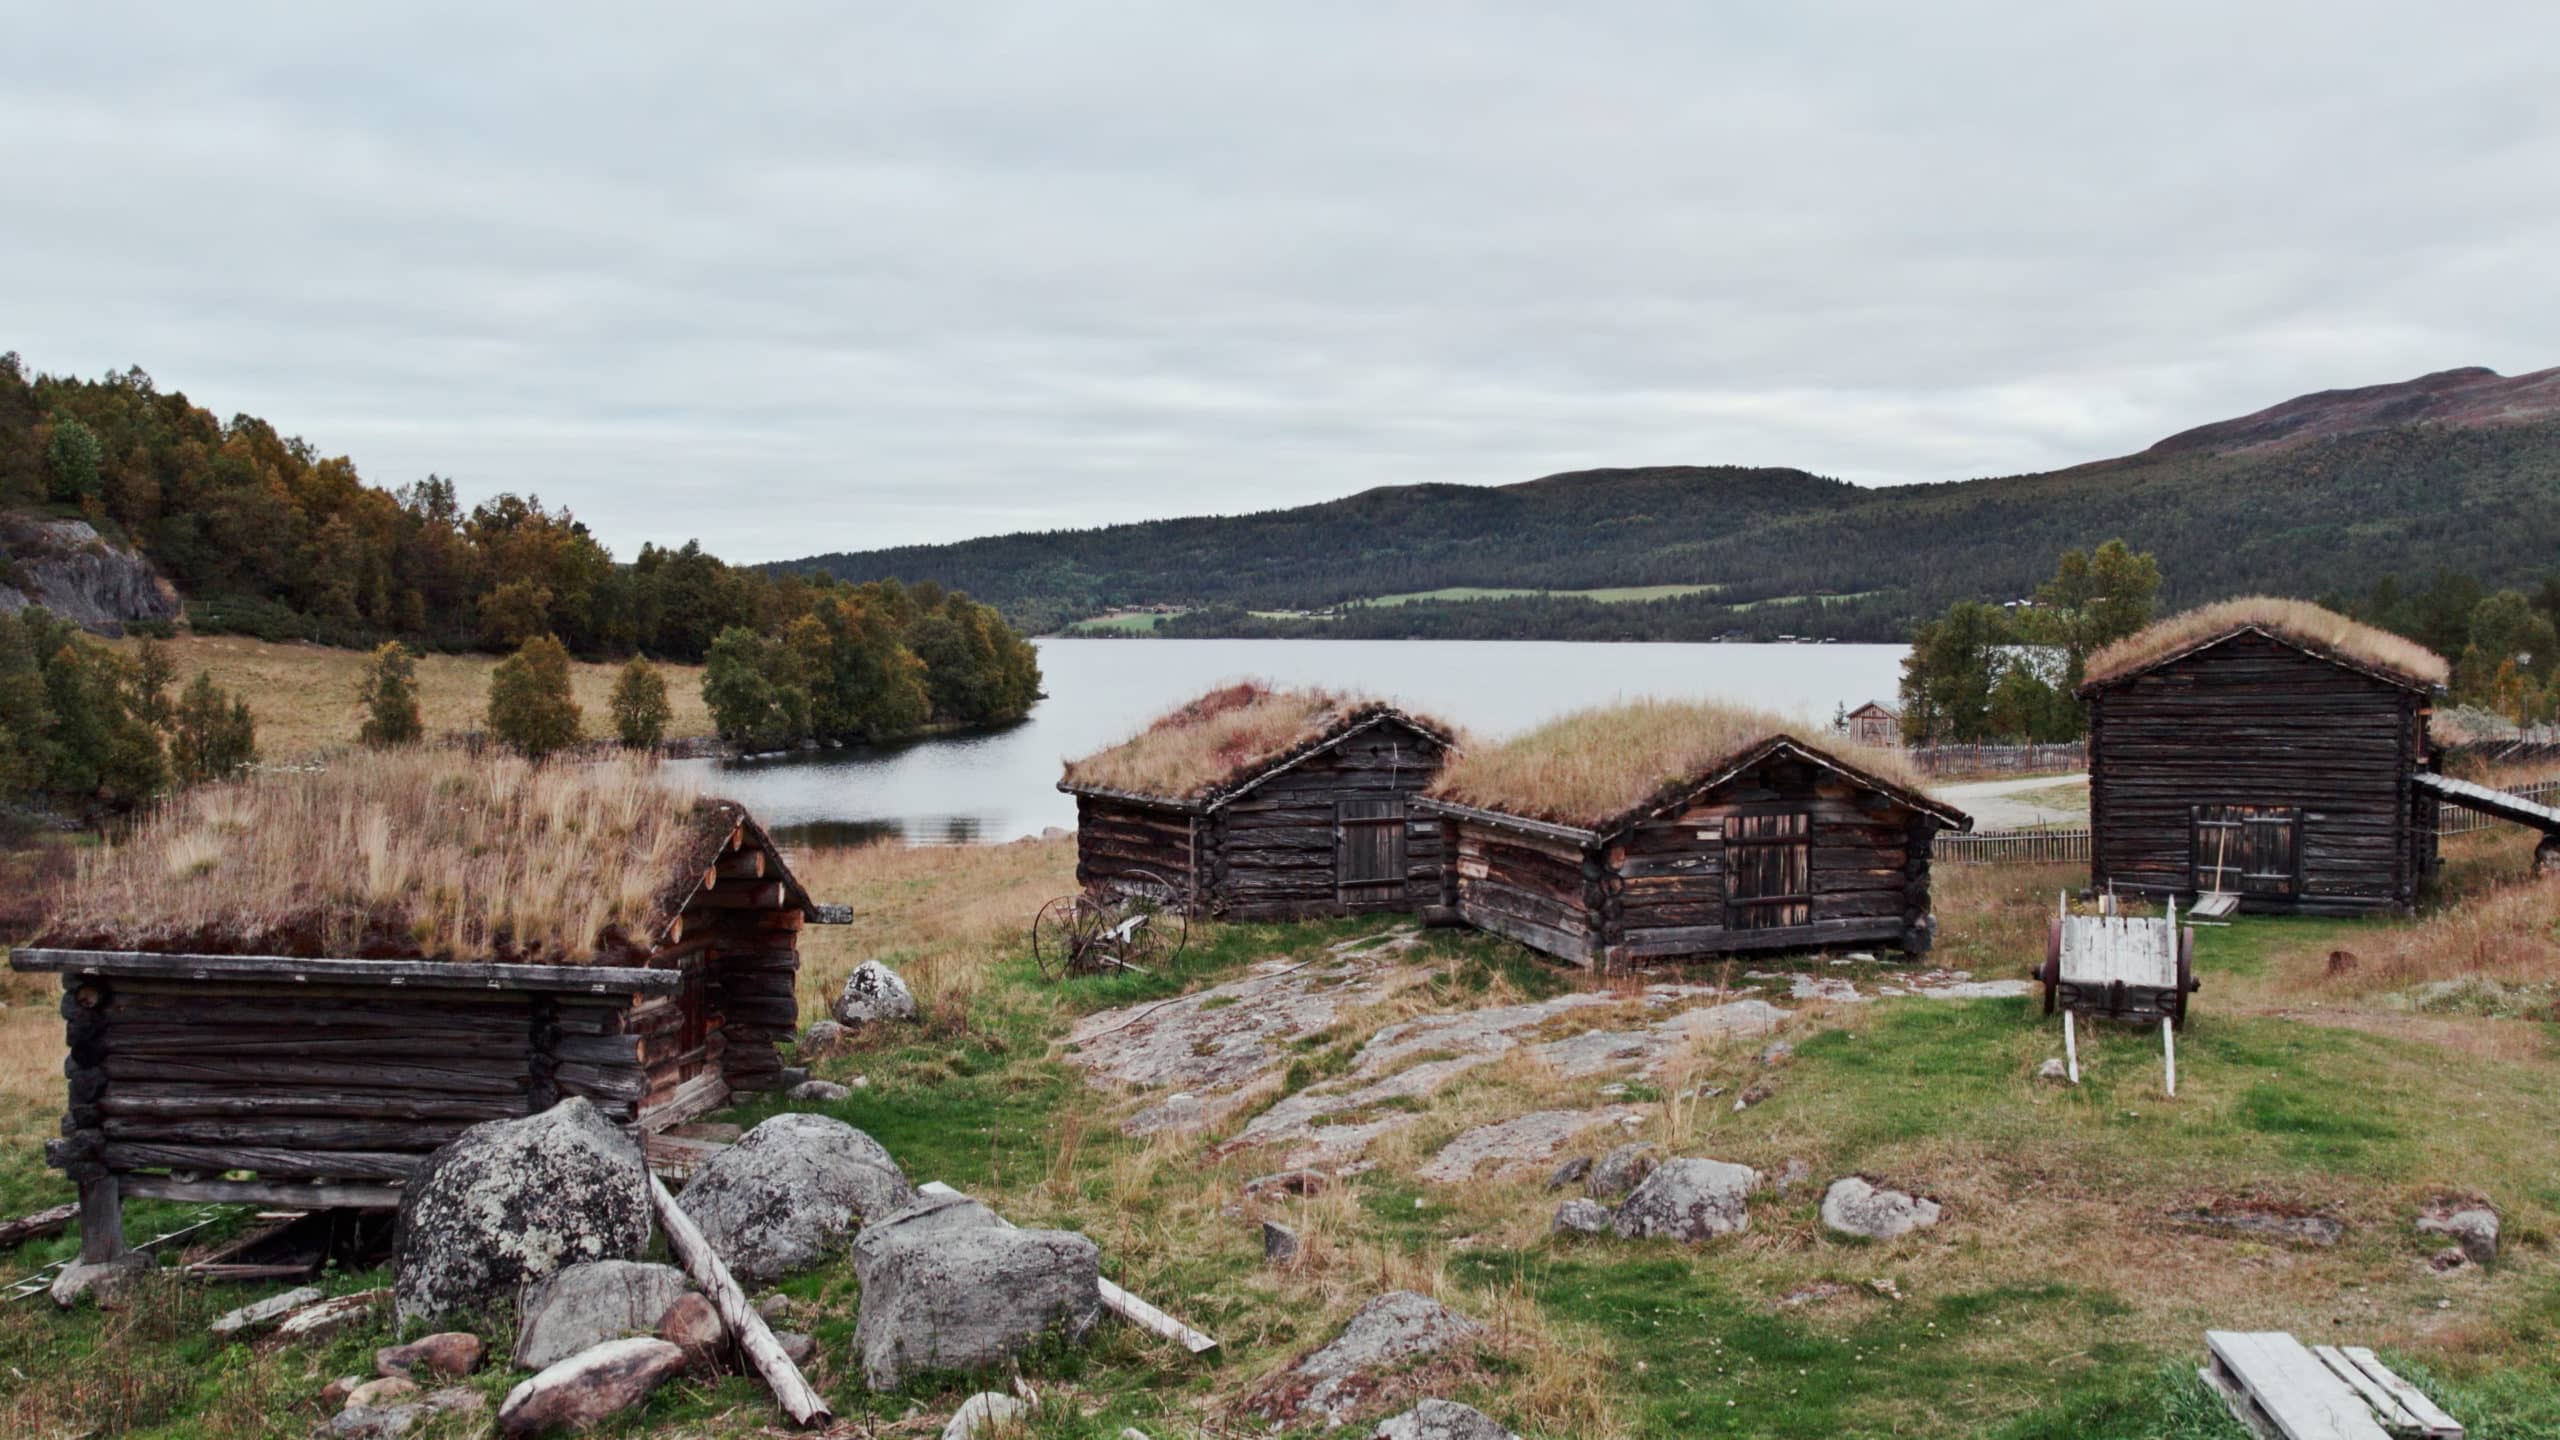 Traditional Norwegian laft wood buildings with grasscovered rooftops in front of a lake.